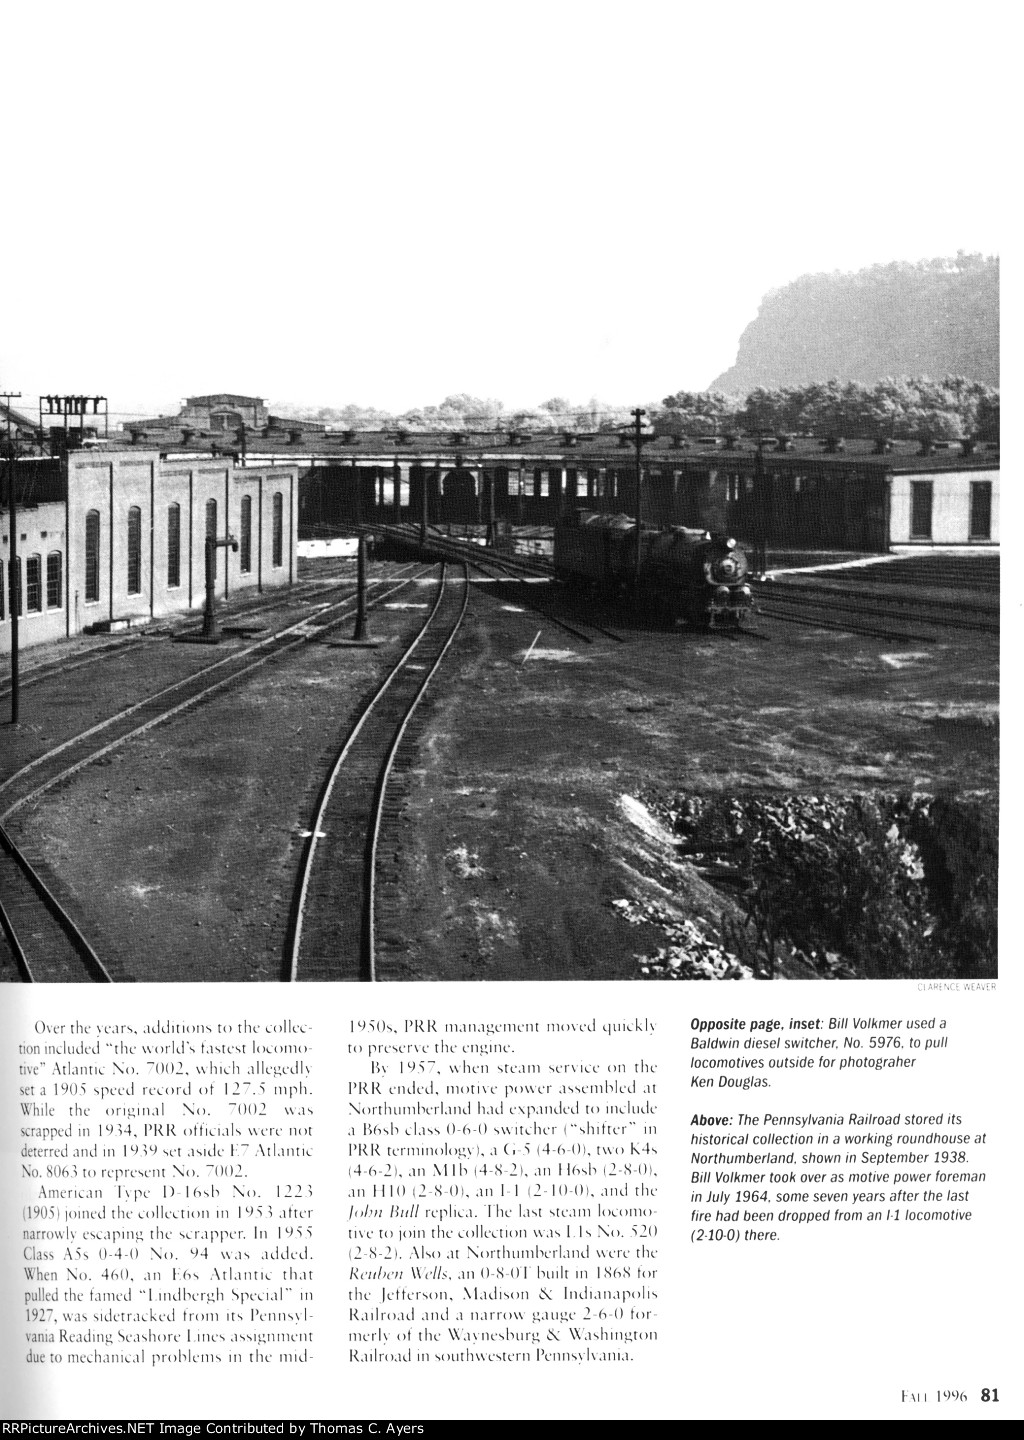 "PRR's Historical Collection," Page 81, 1996